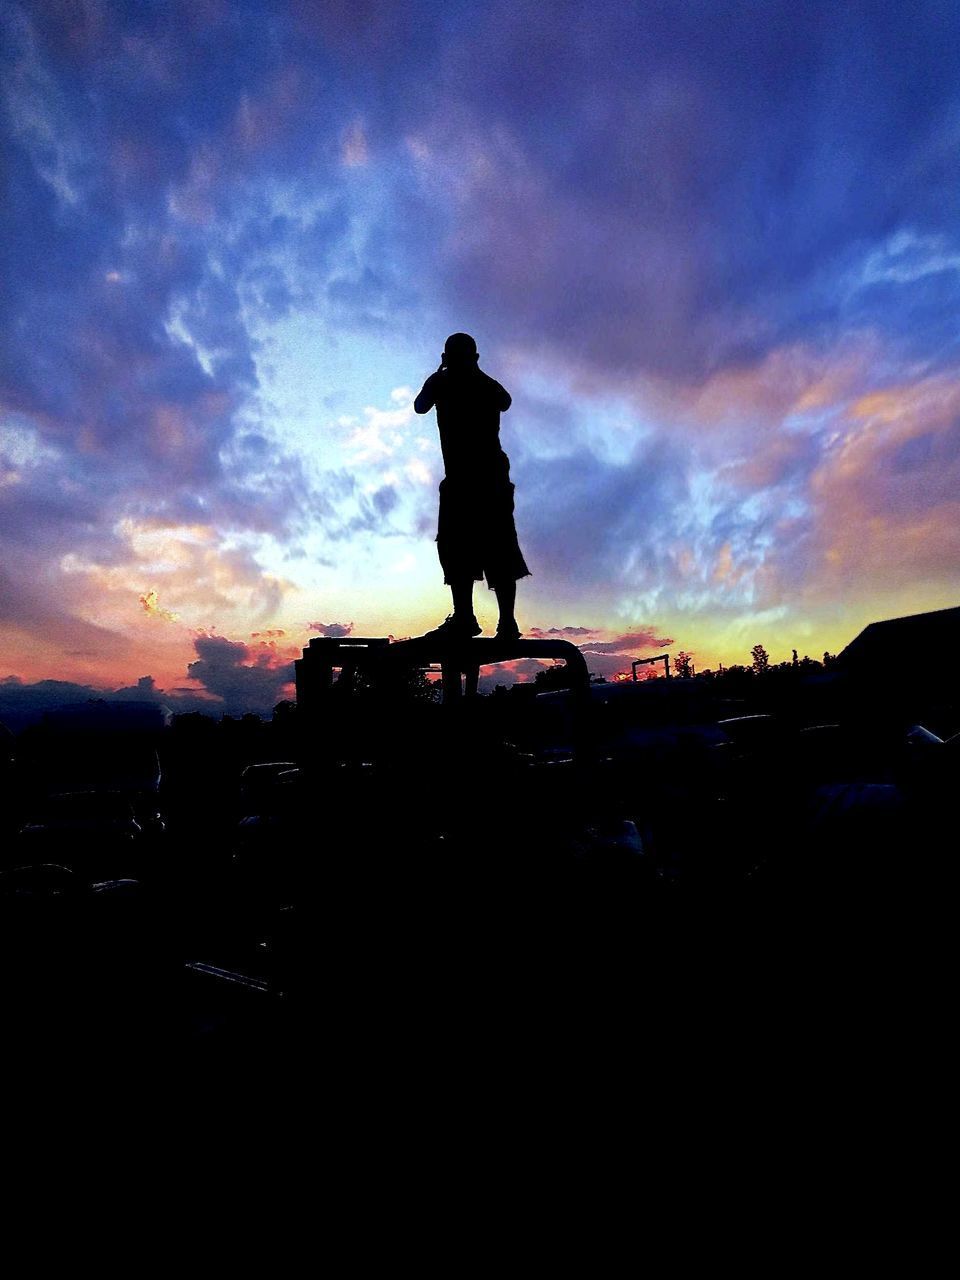 SILHOUETTE OF MAN WITH ARMS RAISED AGAINST SKY DURING SUNSET